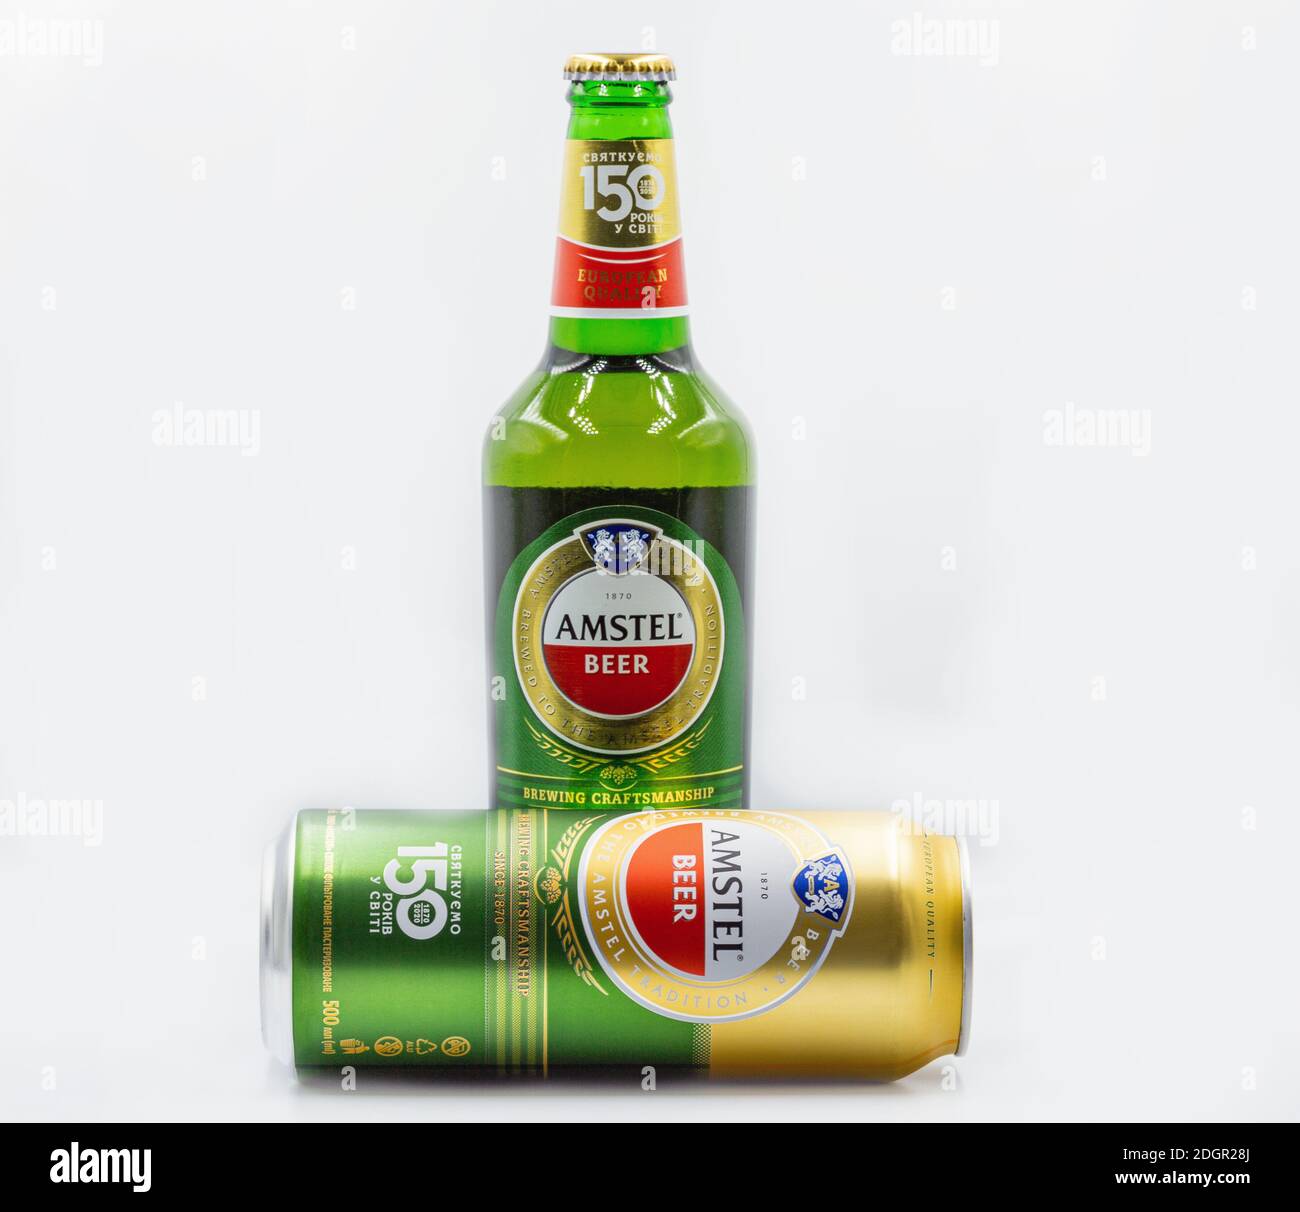 KYIV, UKRAINE - SEPTEMBER 14, 2020: Amstel beer can and bottle closeup against white background. Amstel is a Dutch brewery founded 1870 in Amsterdam. Stock Photo